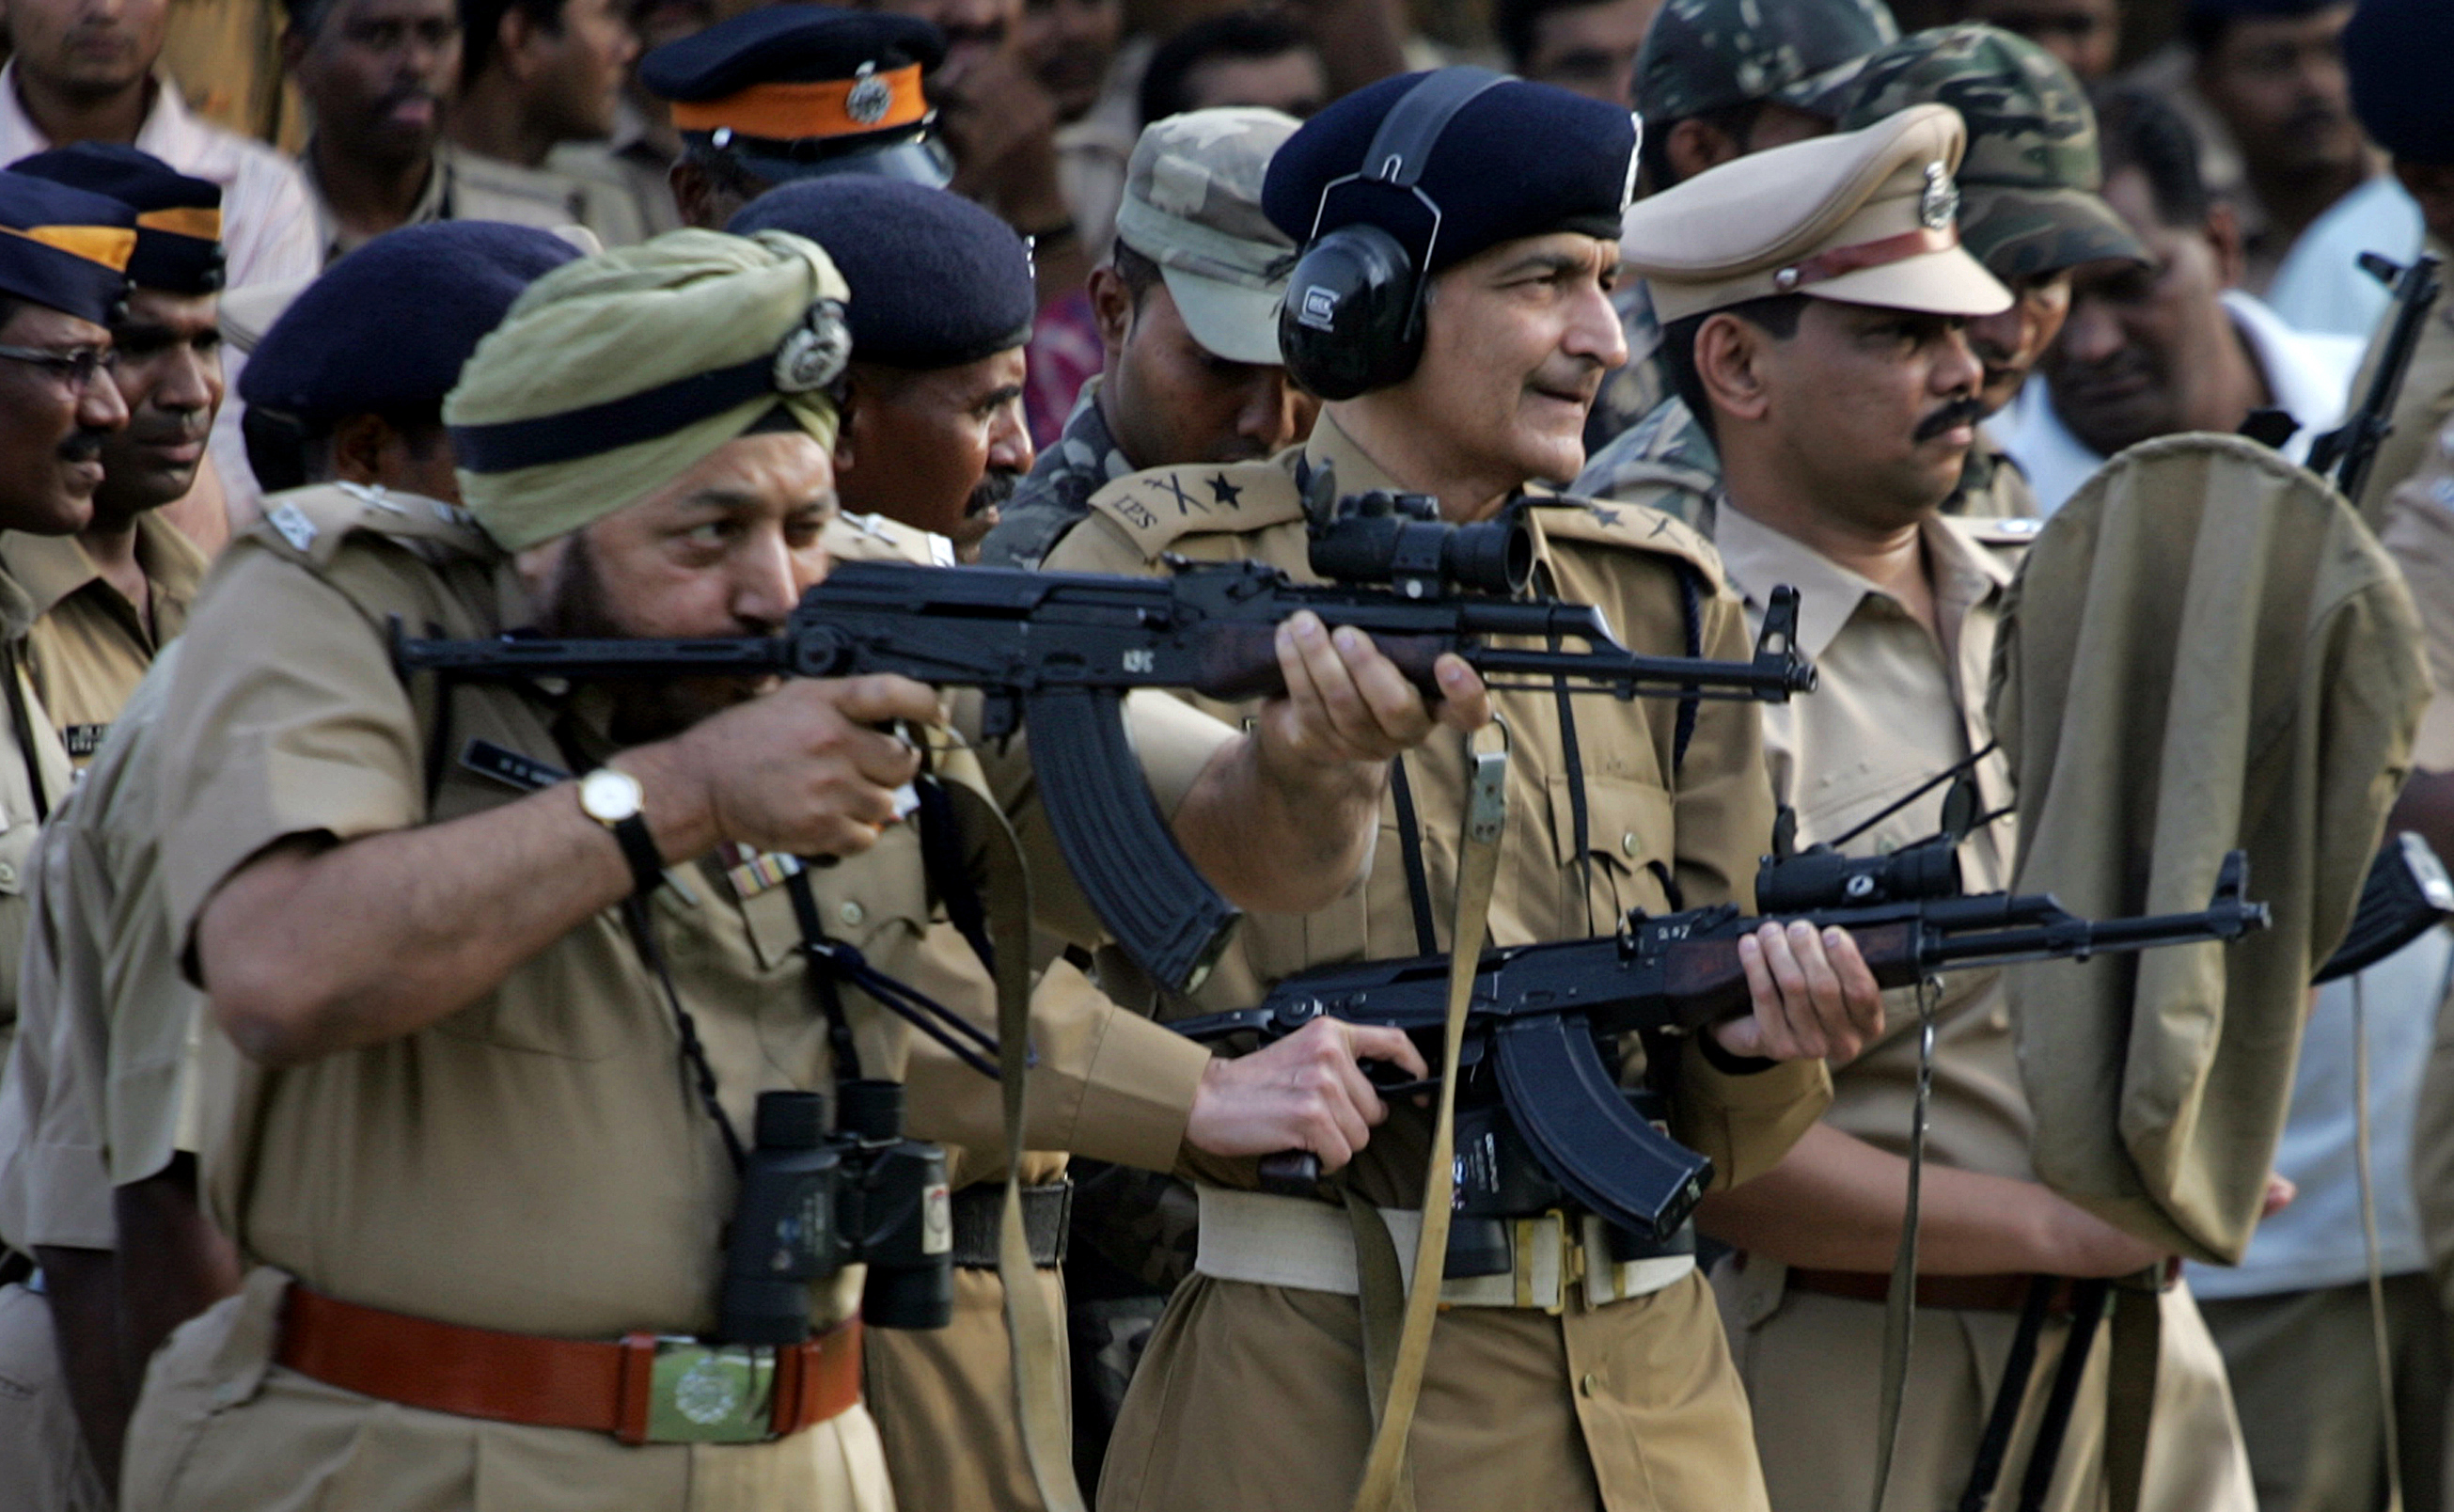 Top officers from the Mumbai Police fix aim at a stationary target with an AK-47 rifle at the SRP Rifle Range in Jogeshwari, Mumbai in 2009. Source: Getty Images